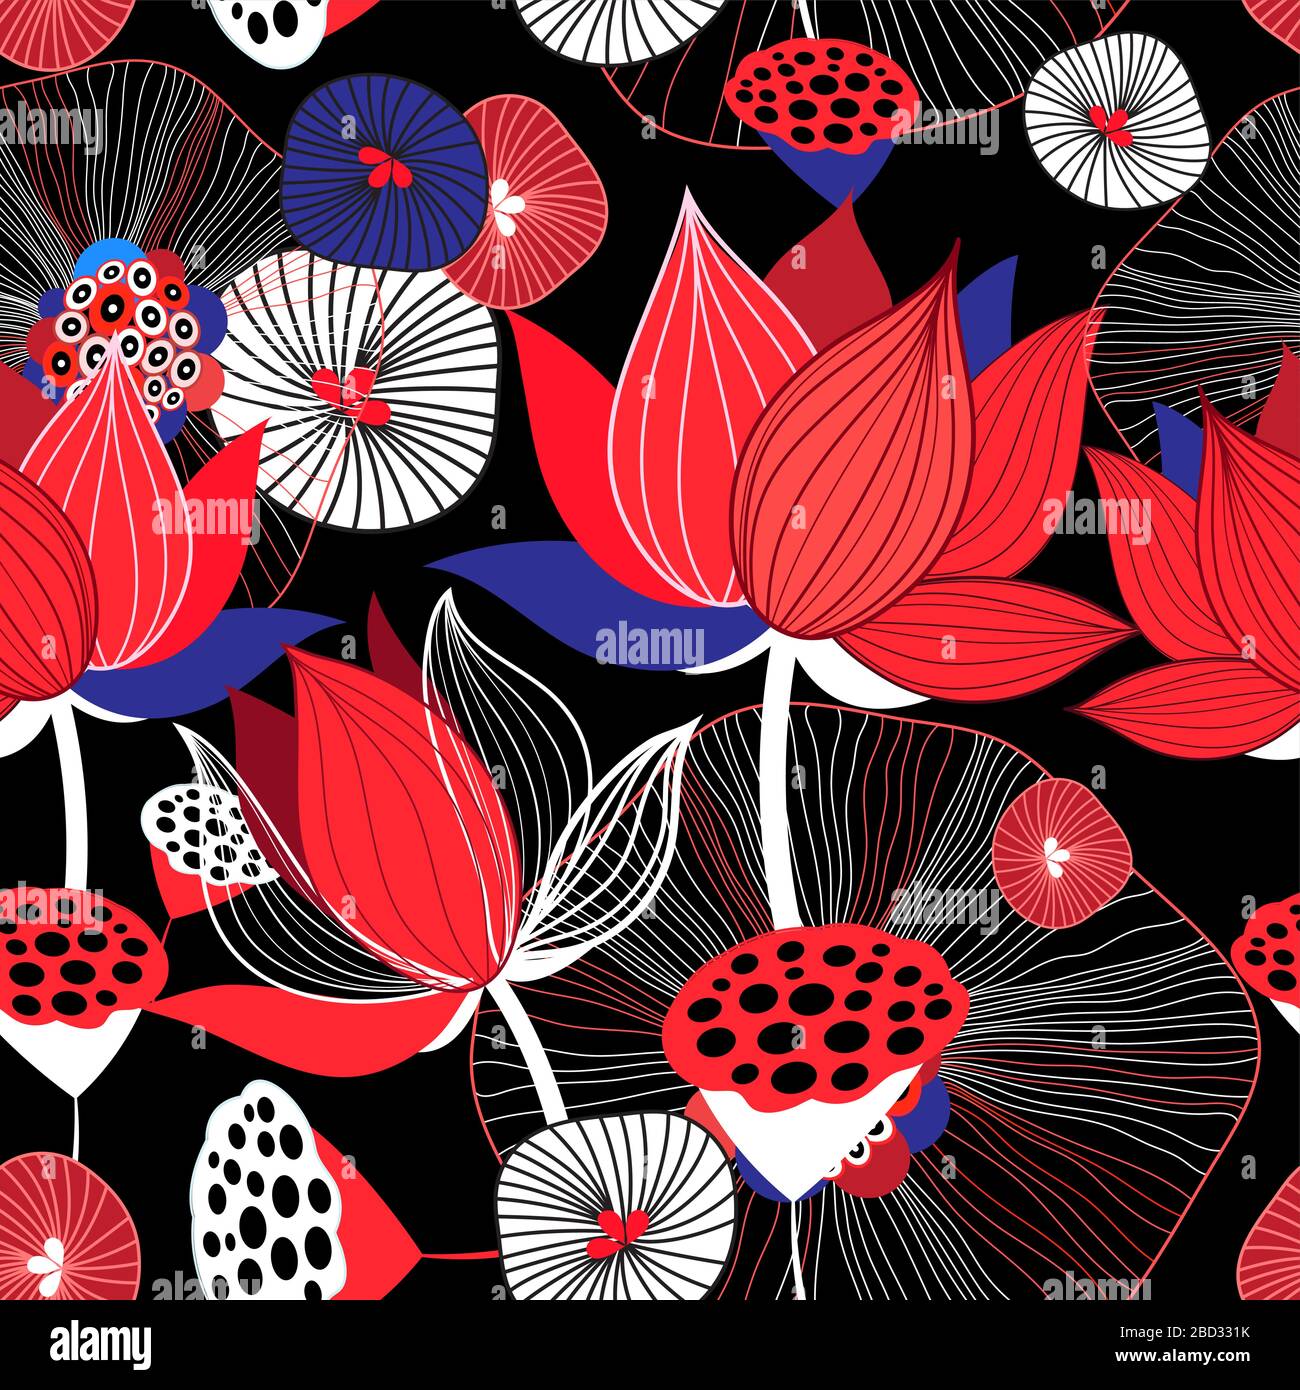 Seamless bright floral background with red lotuses and leaves on dark background Stock Vector